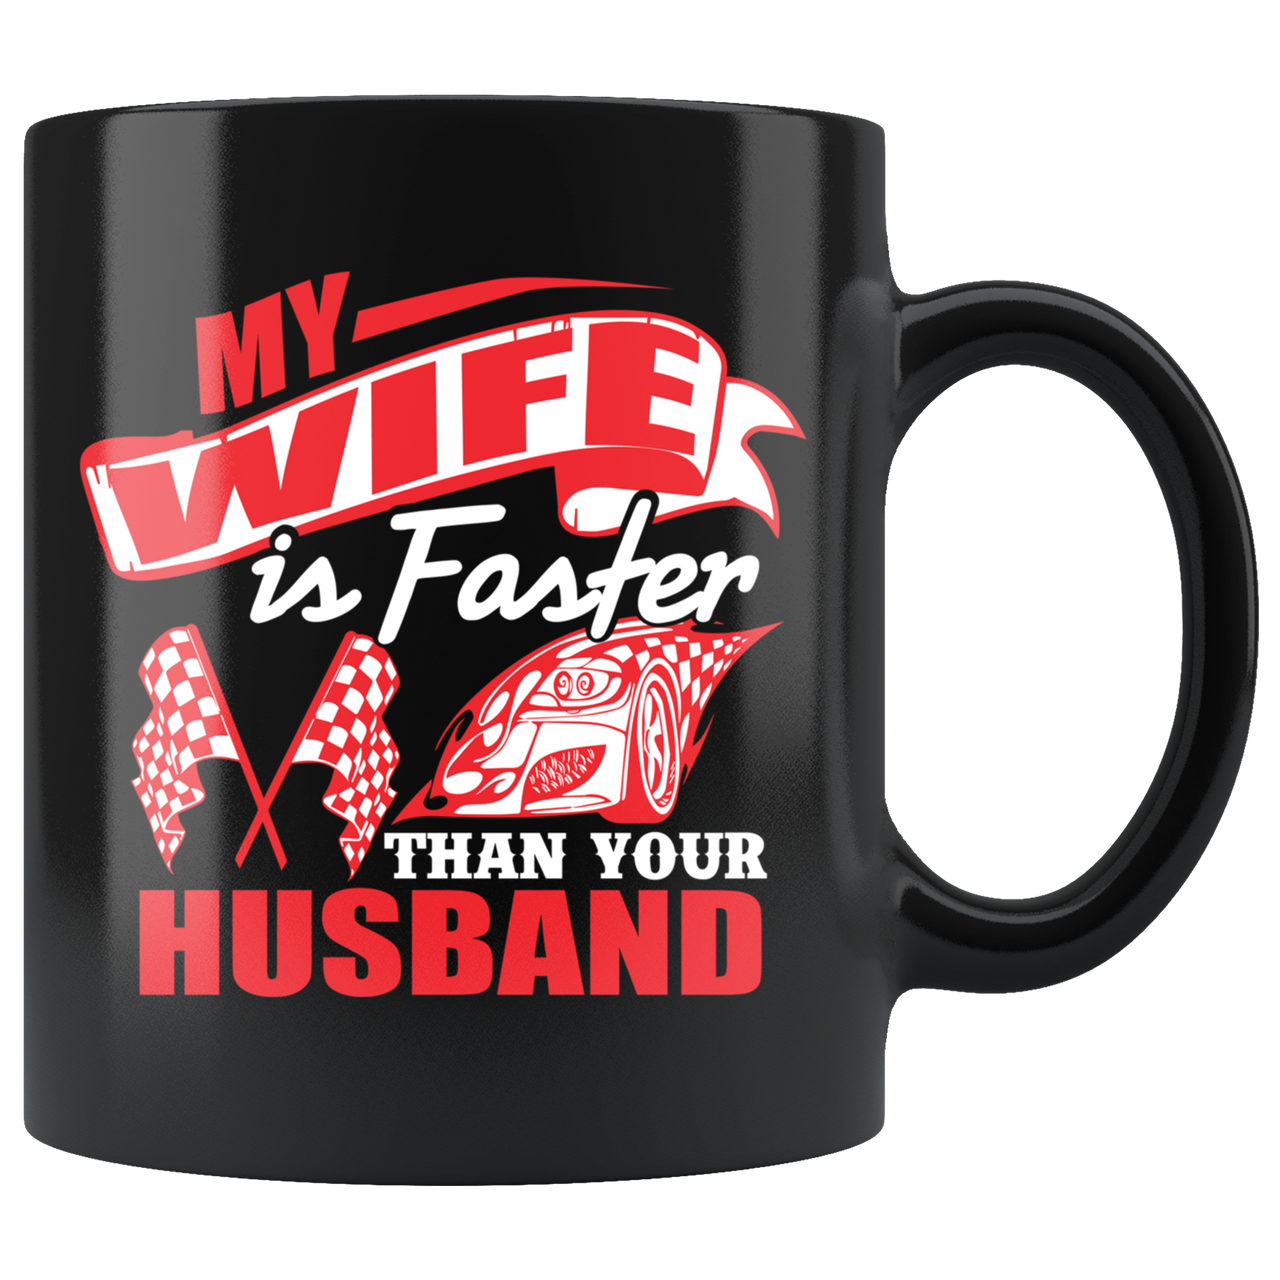 My Wife Is Faster Than Your Husband Mug!